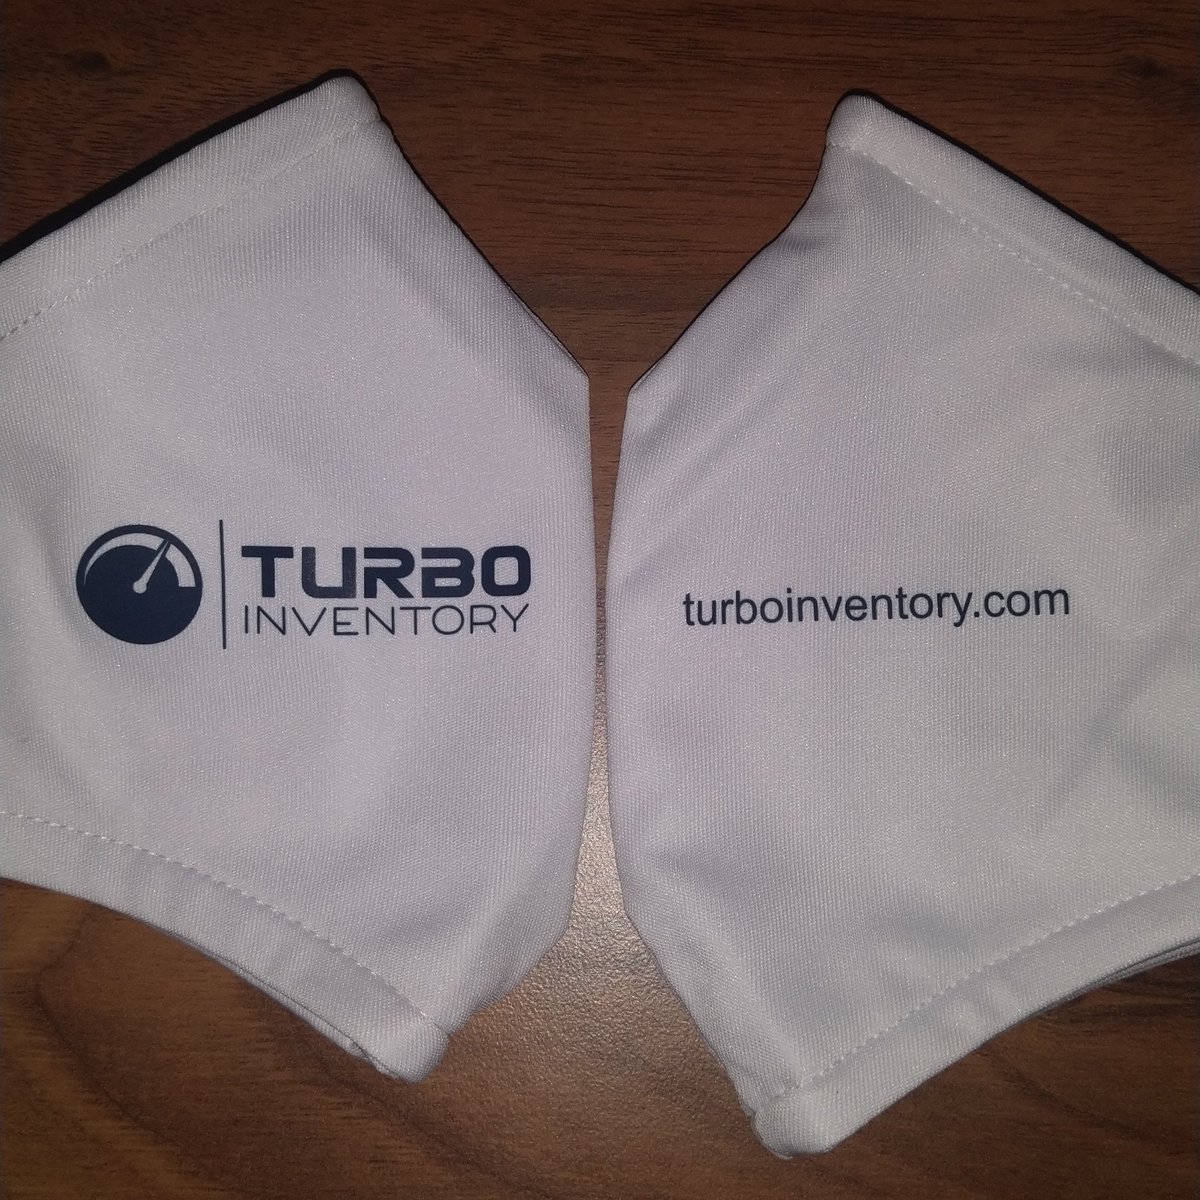 Look what arrived today my new Turbo Inventory face masks. I have some spare if needed

turboinventory.com

 #businessmanagement   #inventorymanagement #inventorytracking #veterinarysoftware #epos #businessanalytics
#retailsolutionprovider #pointofsale #cloud #autoparts